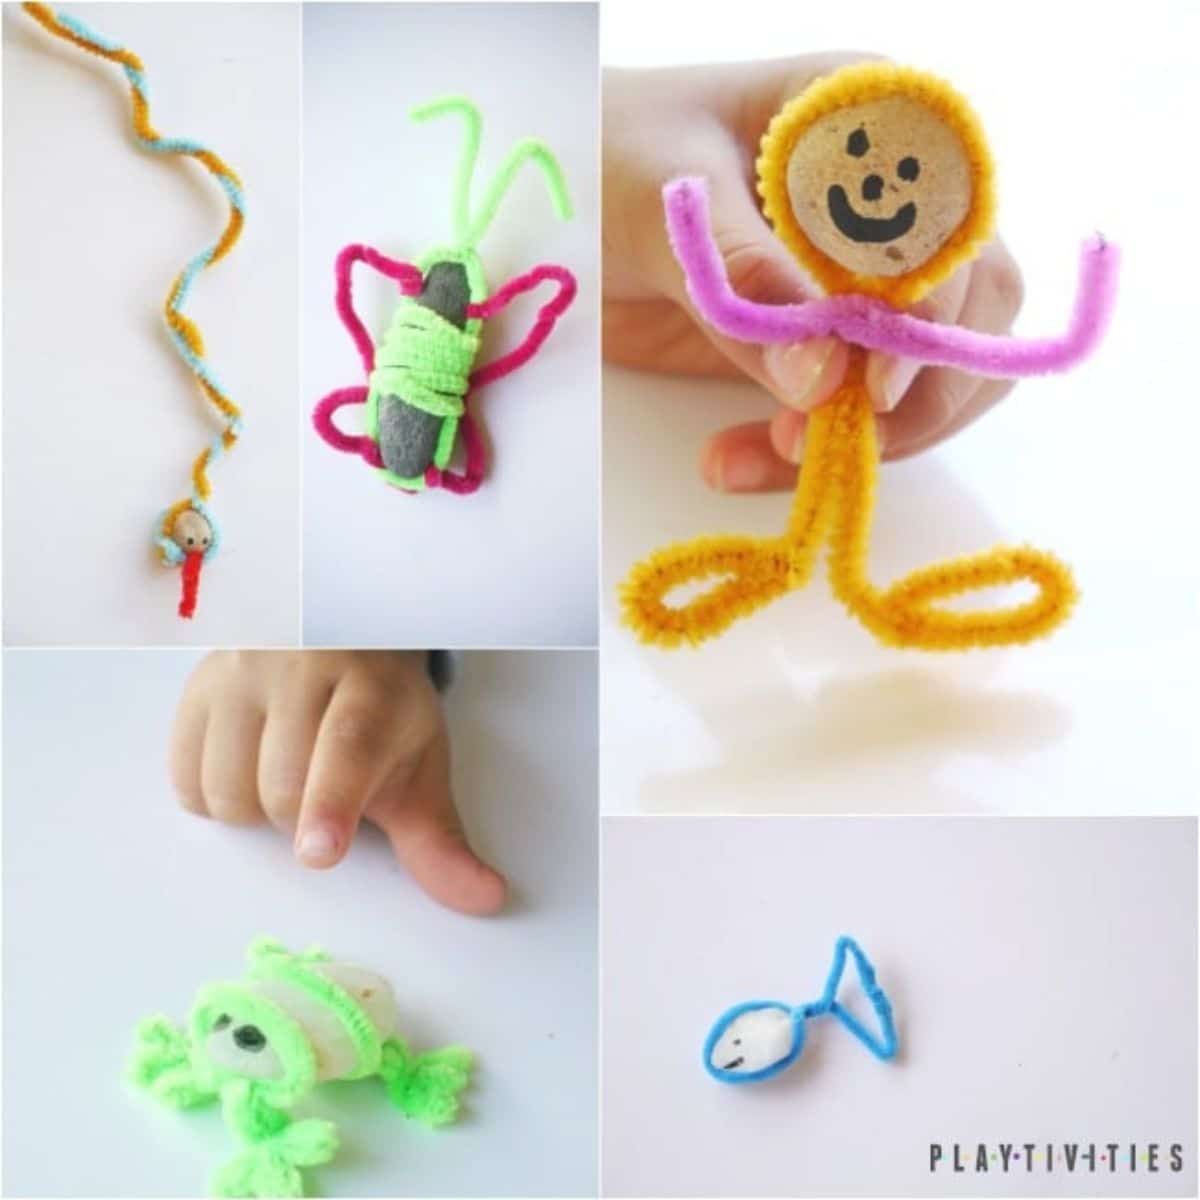 5 images of pipe cleaner animals made with rocks.